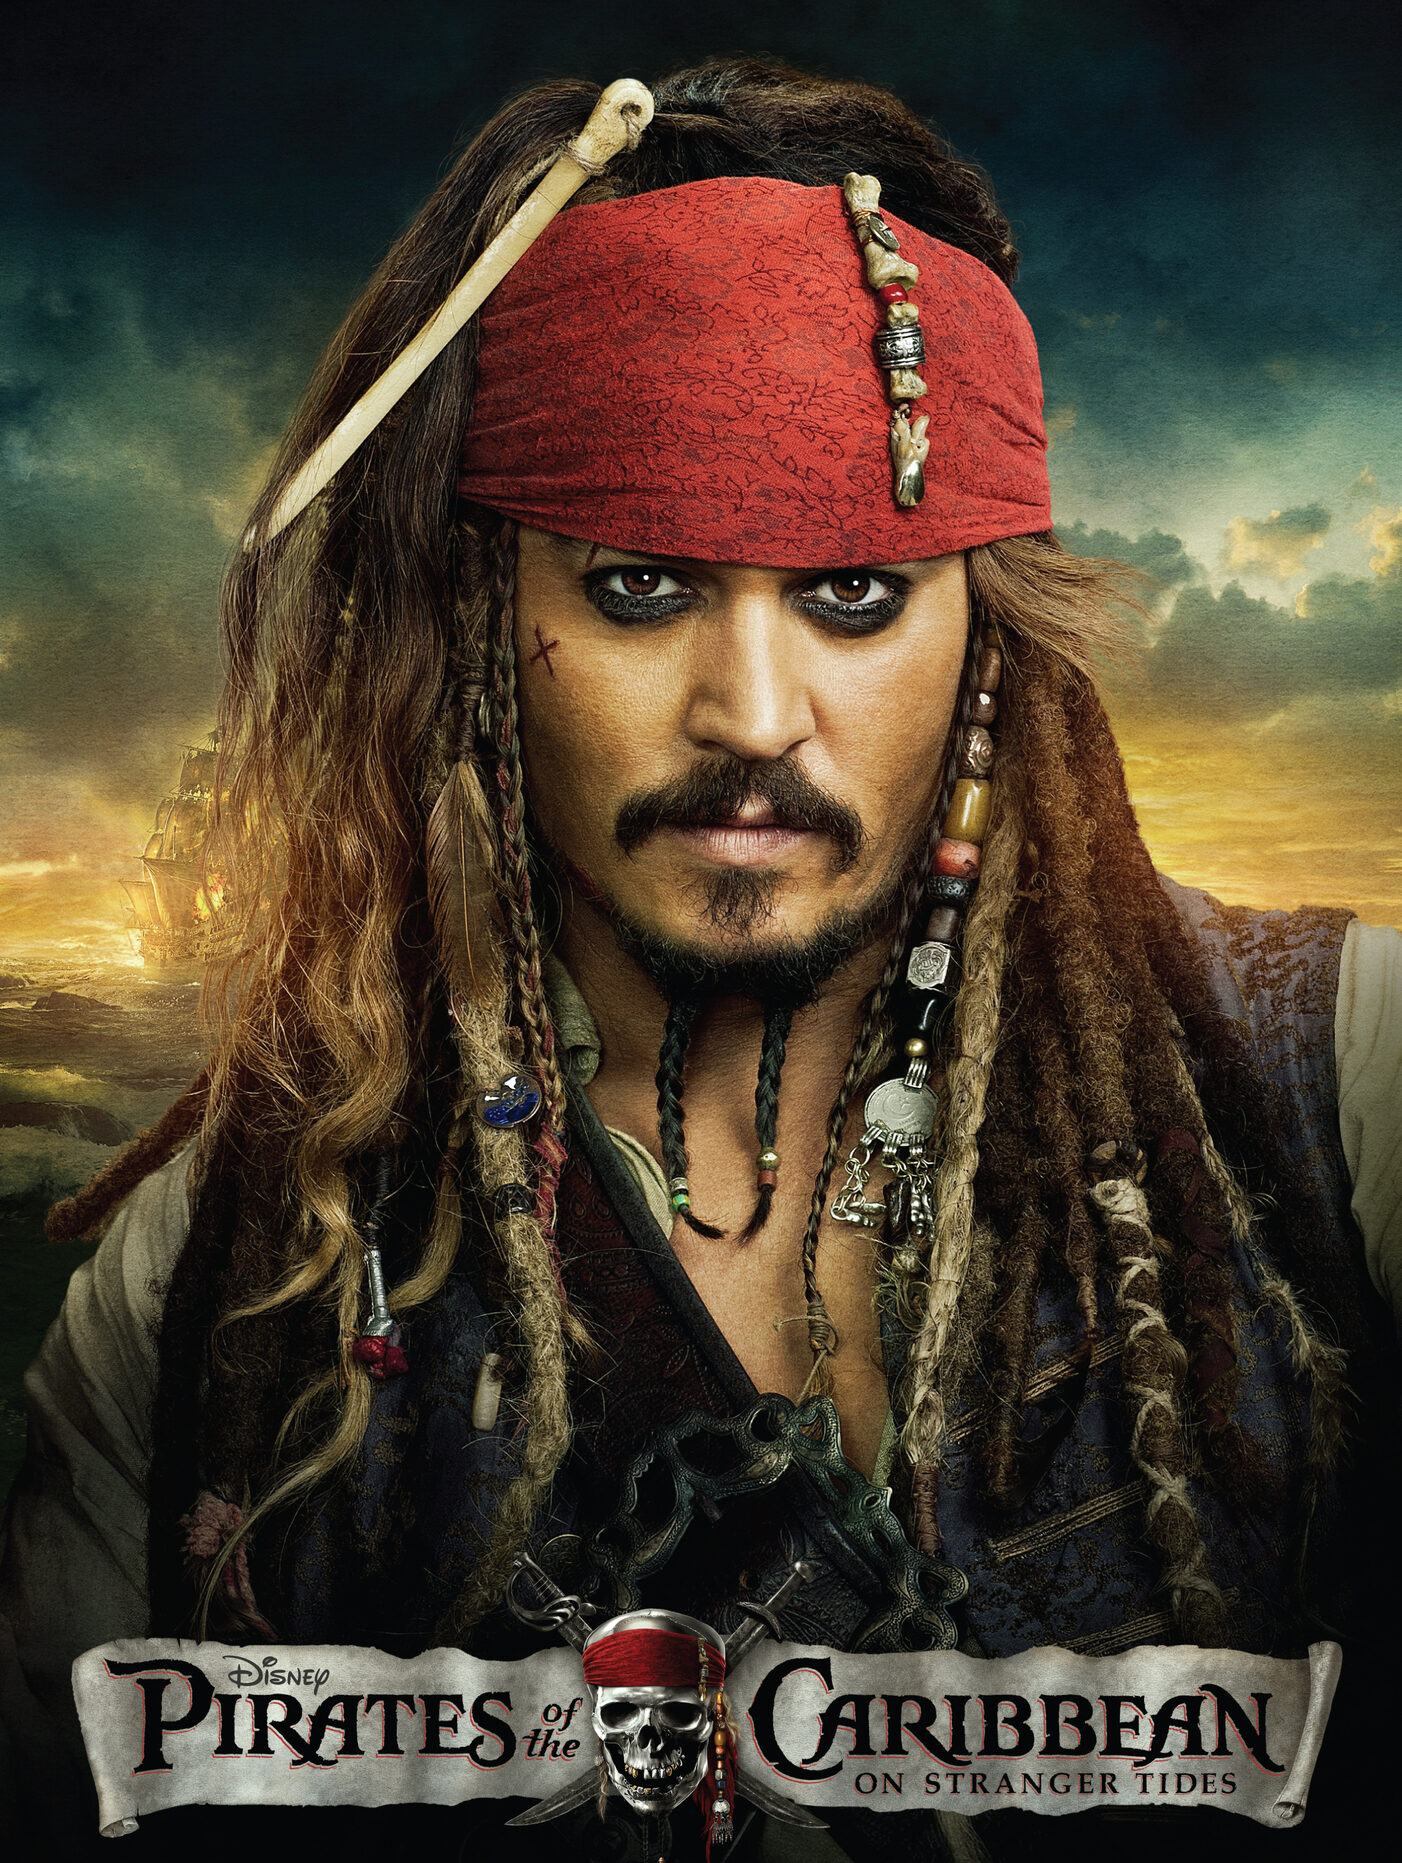 Disney re-introduces Captain Jack Sparrow in light show after 4 years